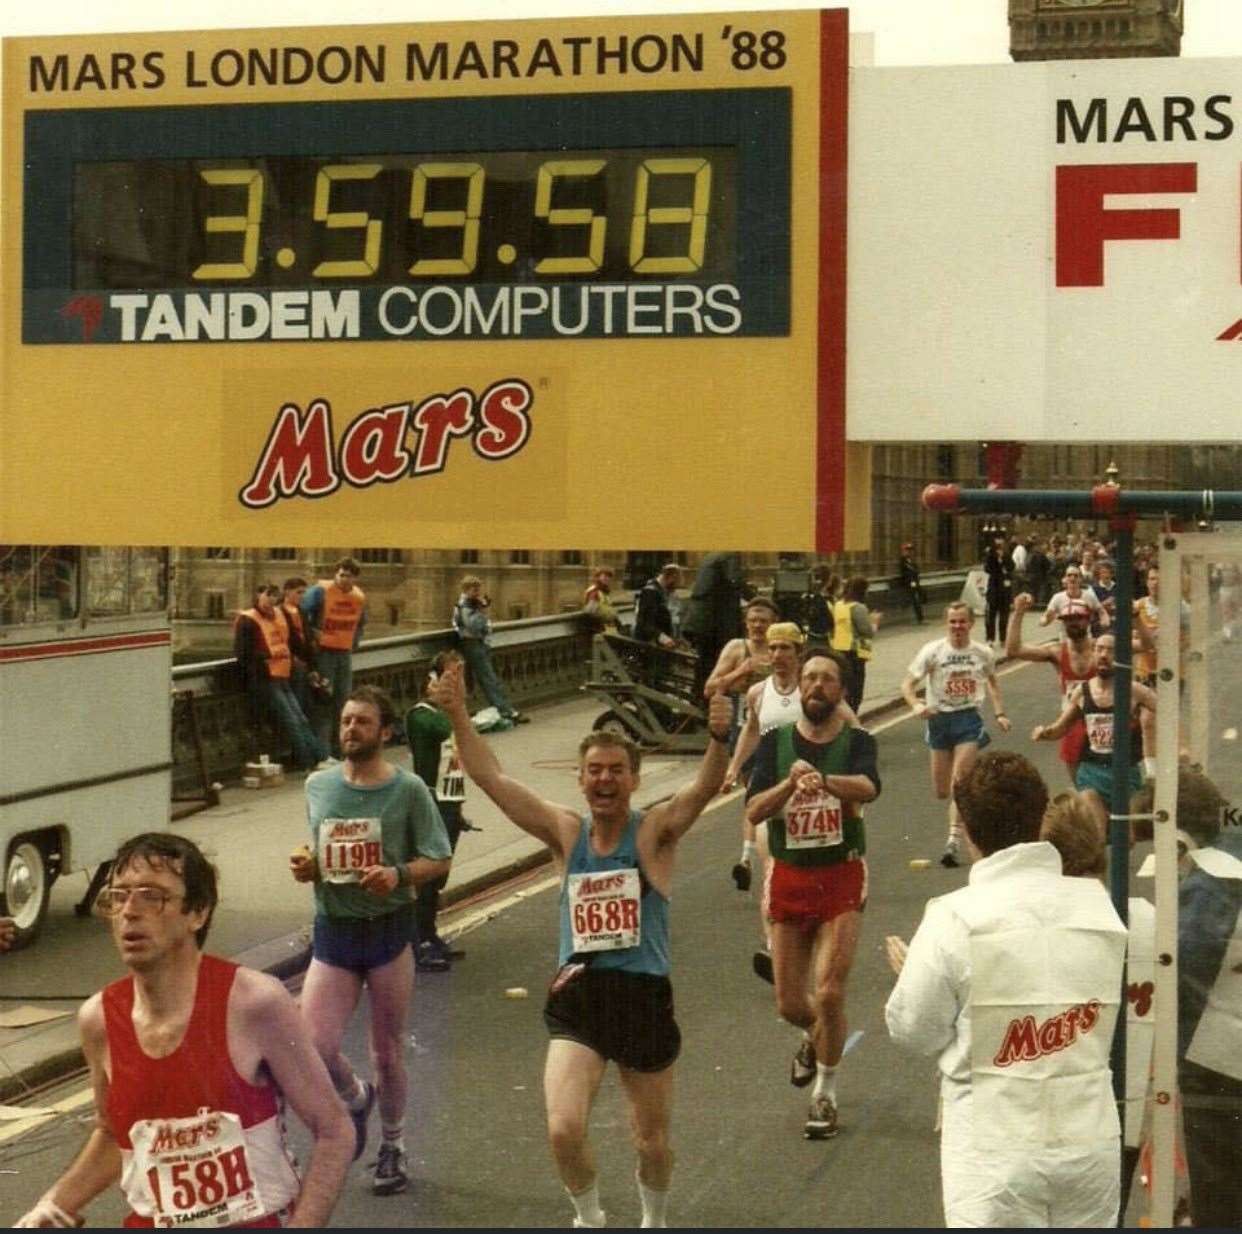 Cyril Price completing the Mars Marathon in under four hours